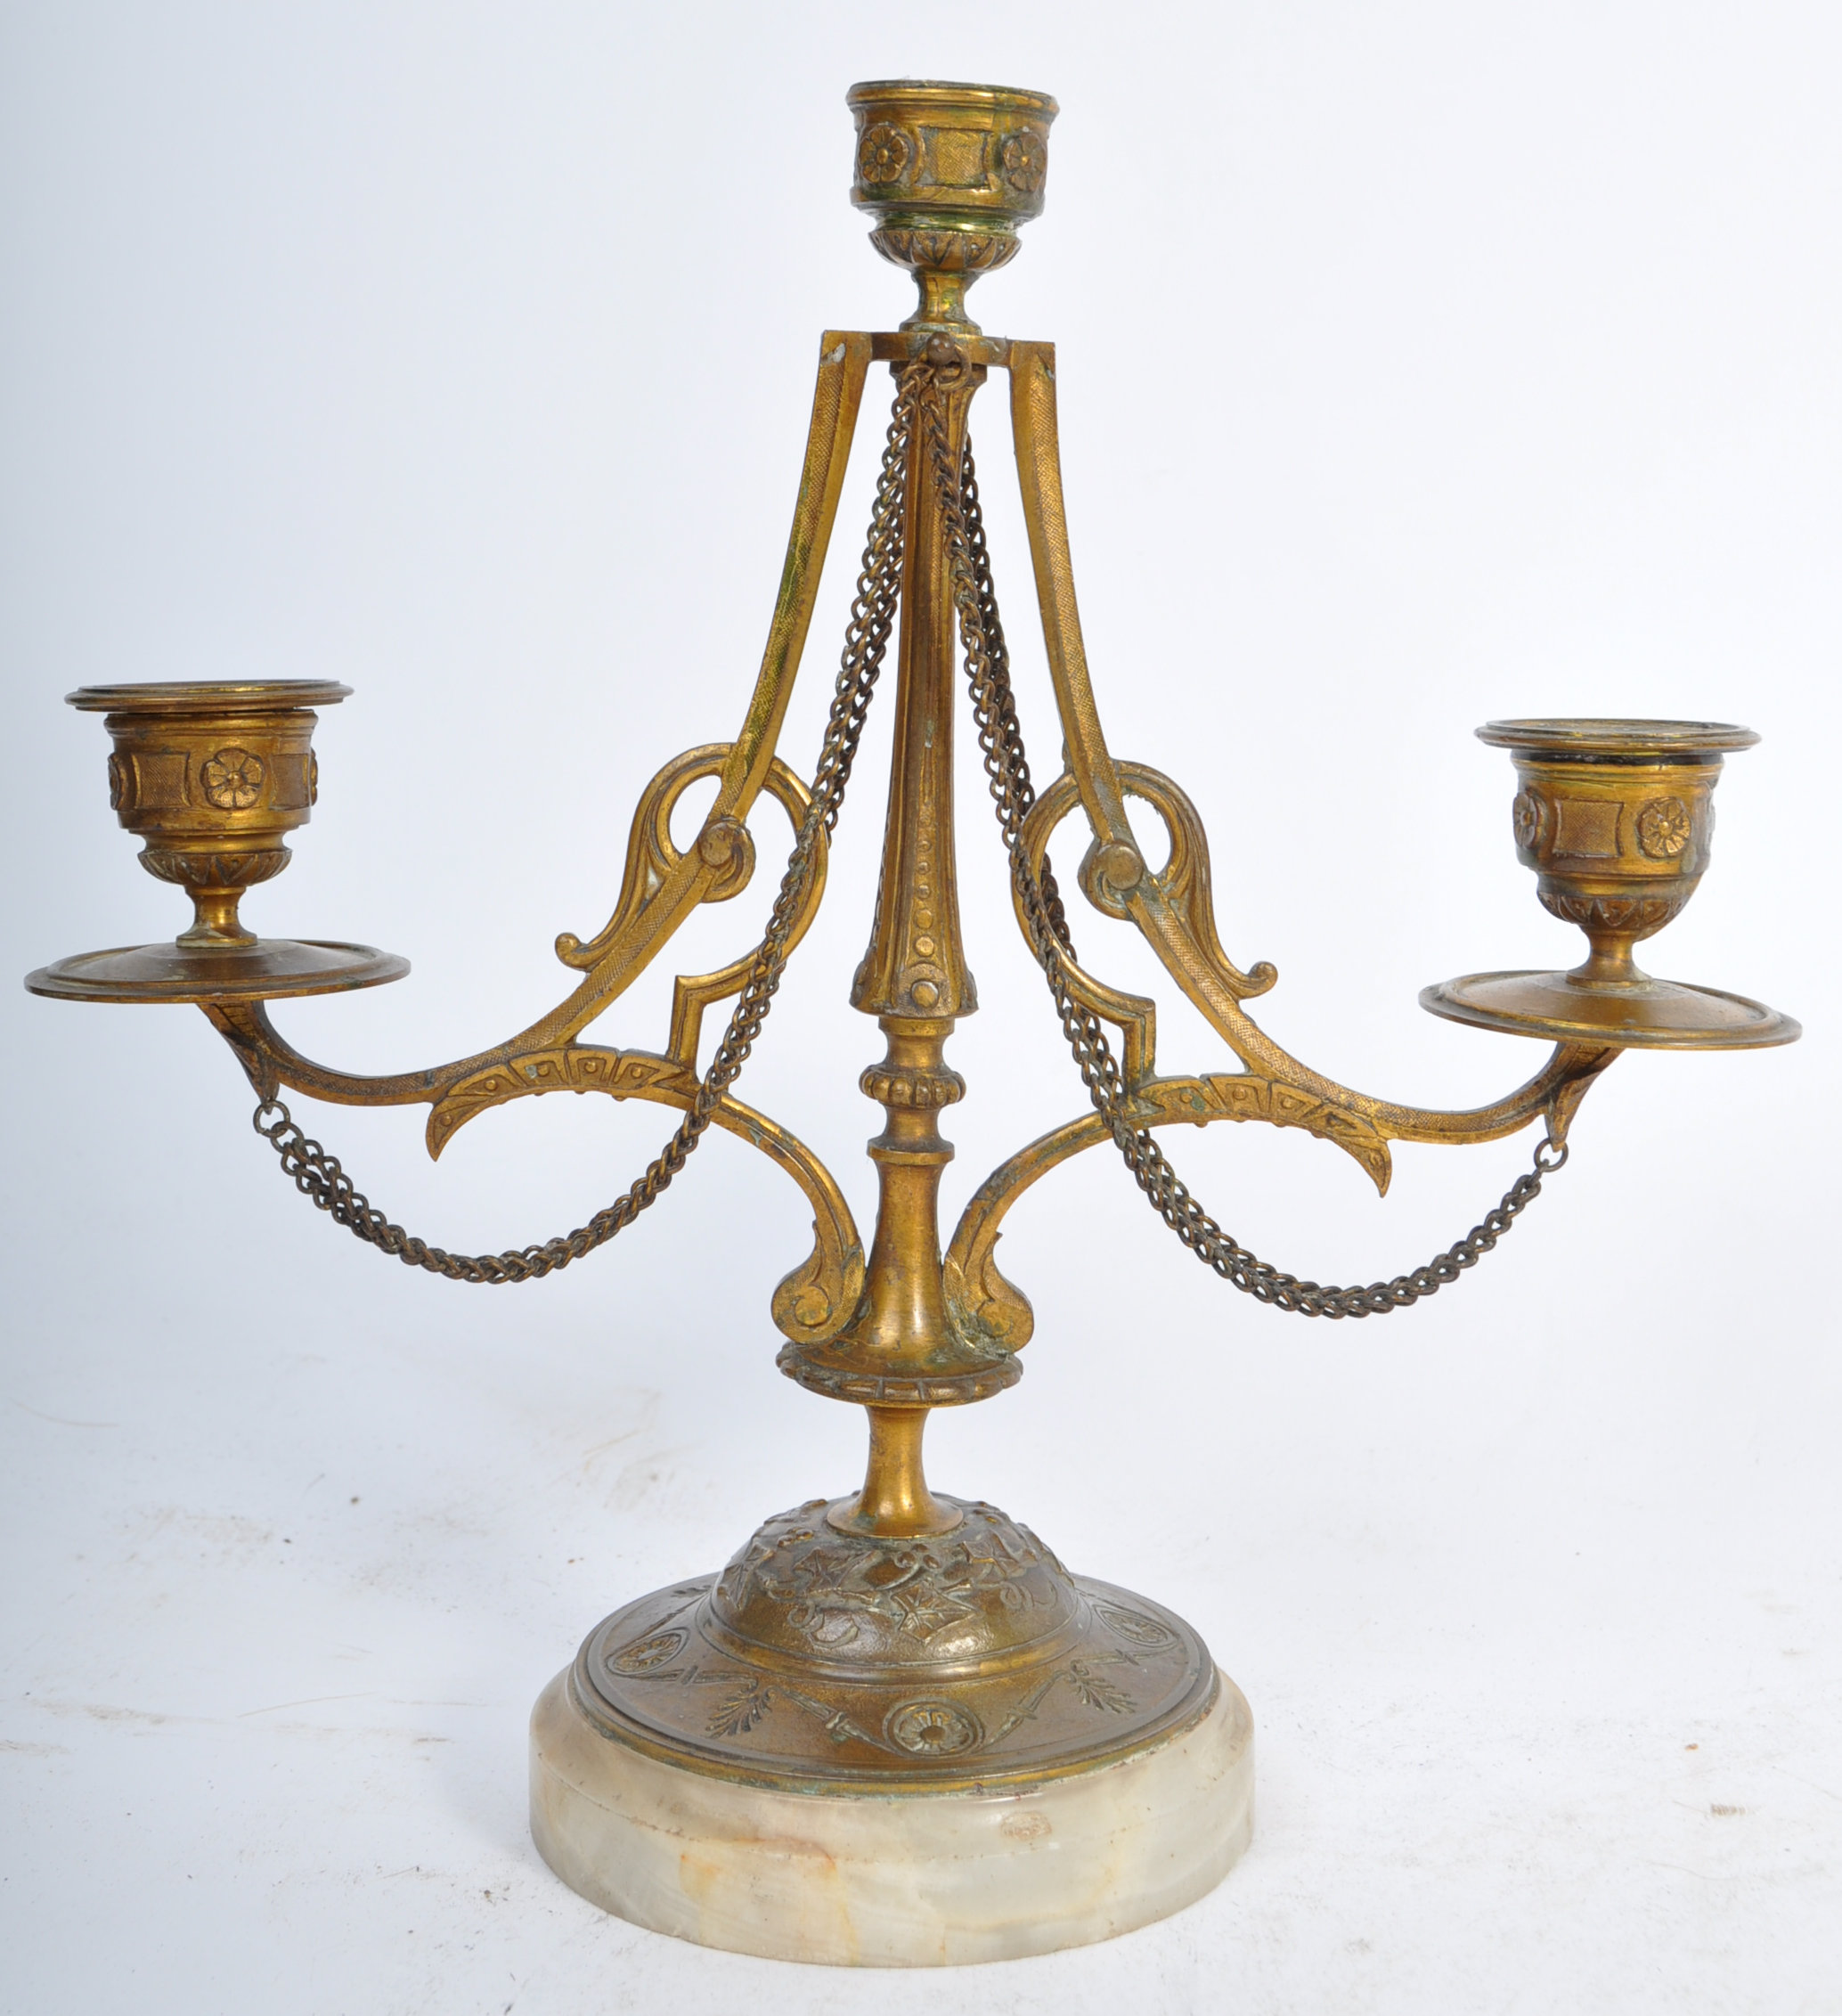 PAIR OF 19TH CENTURY BRONZE AND MARBLE CANDLESTICKS - Image 7 of 8